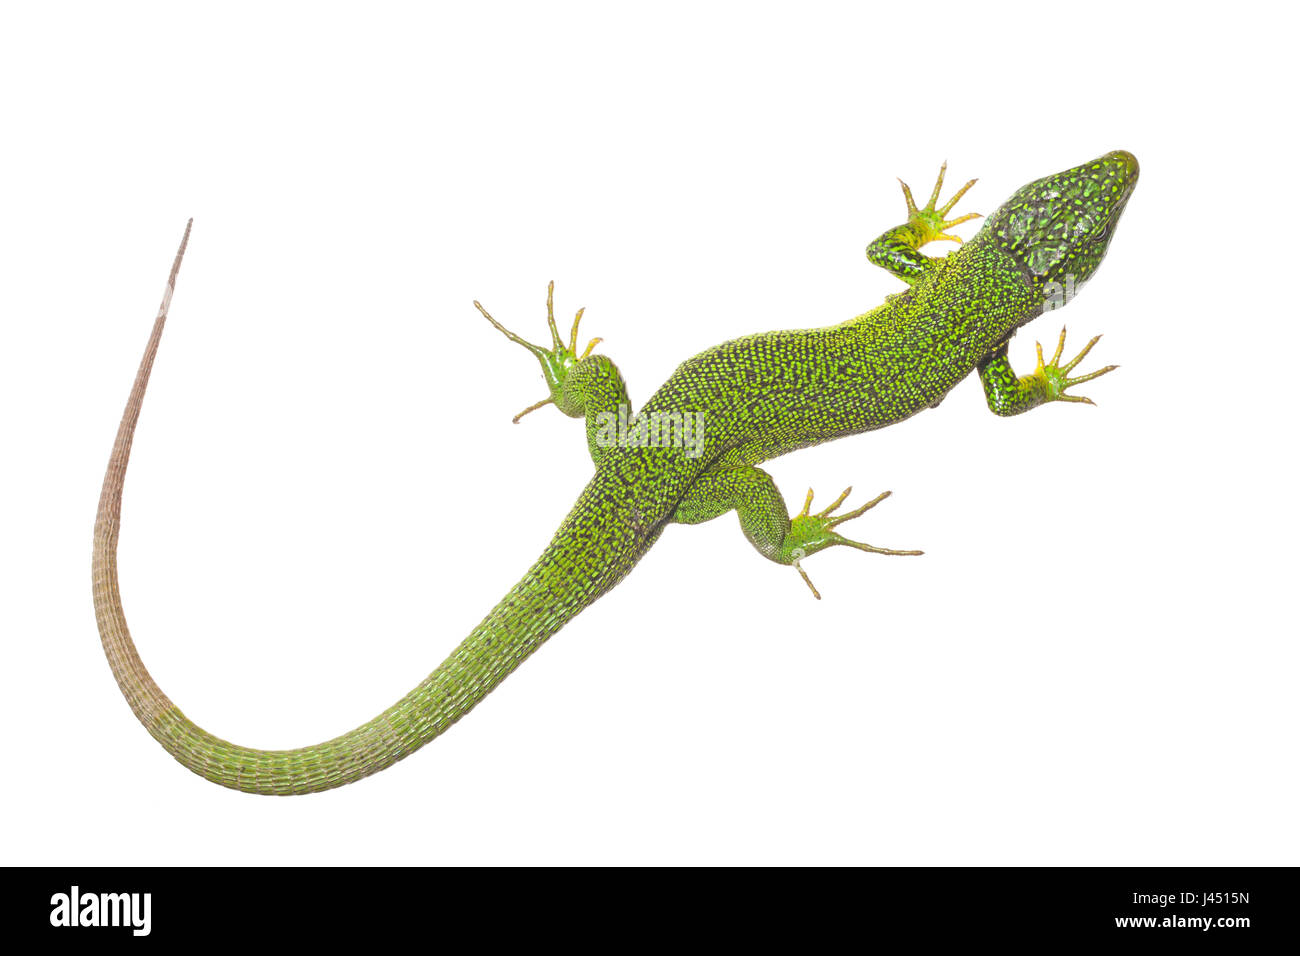 Male Western green lizard photographed on a white background Stock Photo